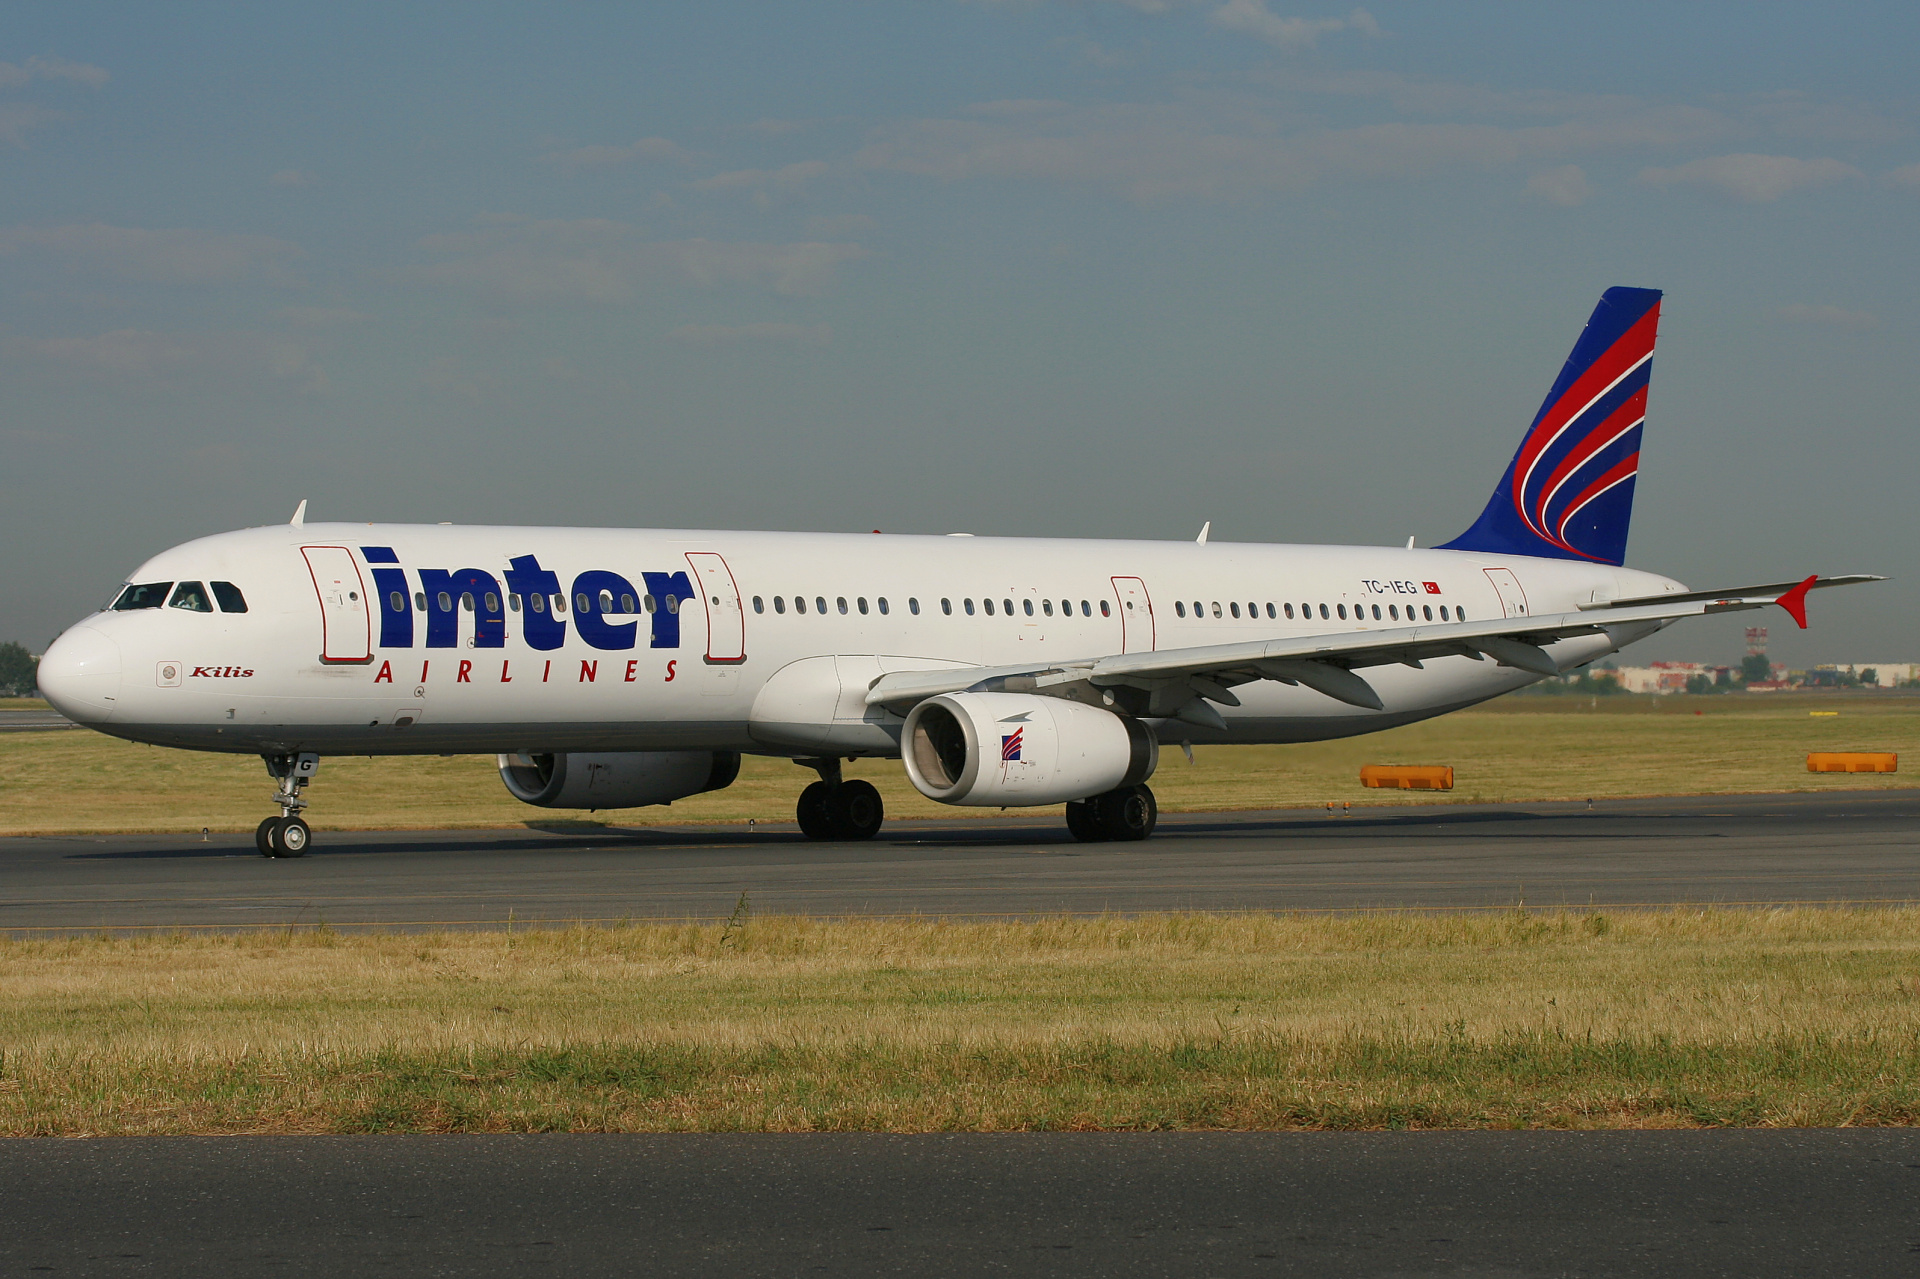 TC-IEG, Inter Airlines (Aircraft » EPWA Spotting » Airbus A321-200)